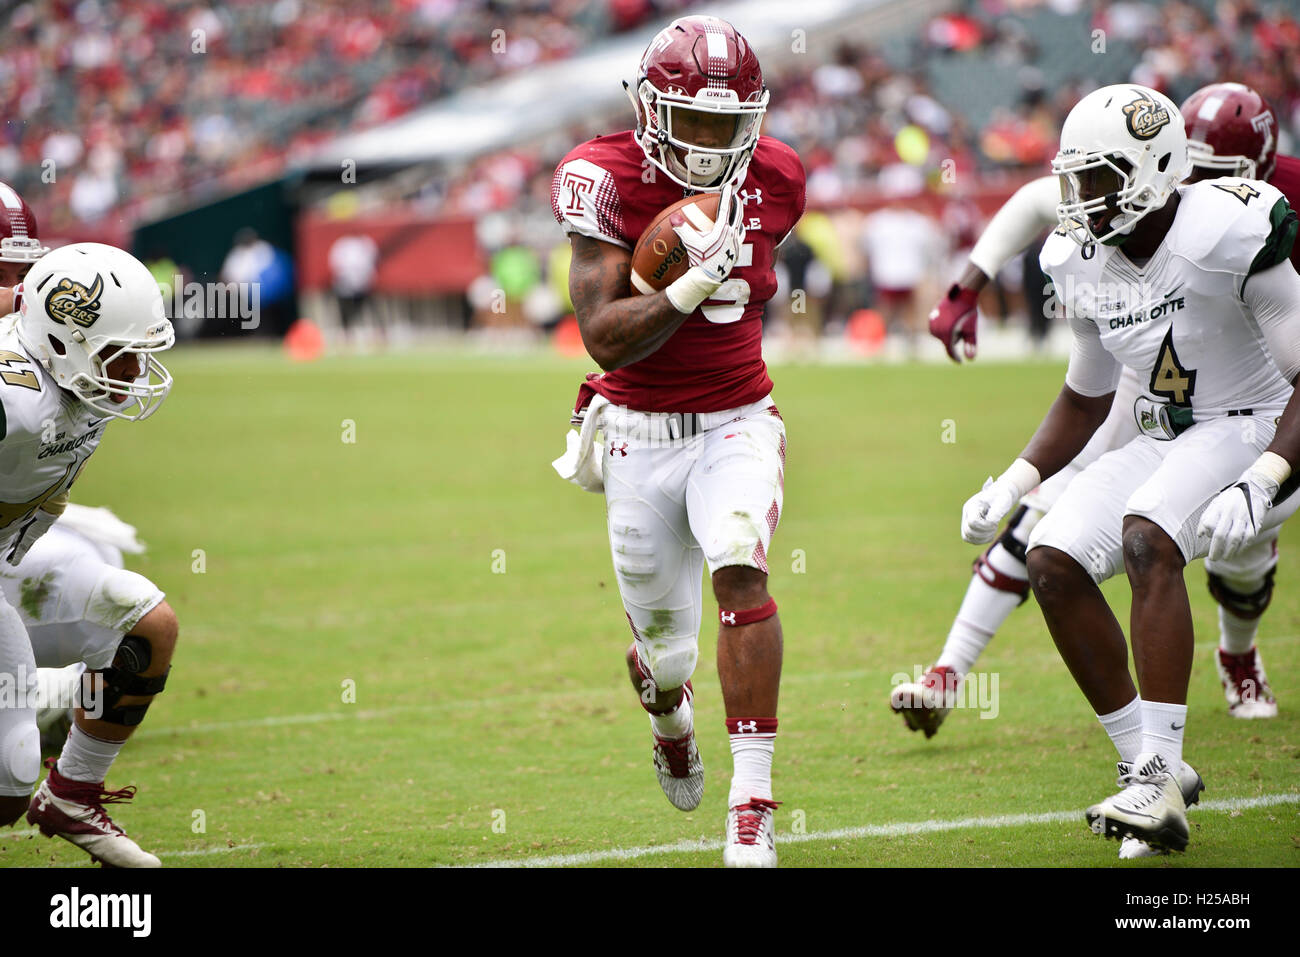 Philadelphia, Pennsylvania, USA. 24th Sep, 2016. Temple's RB, JAHAD THOMAS, (5) in action against Charlotte during the football game played at Lincoln Financial Field in Philadelphia © Ricky Fitchett/ZUMA Wire/Alamy Live News Stock Photo